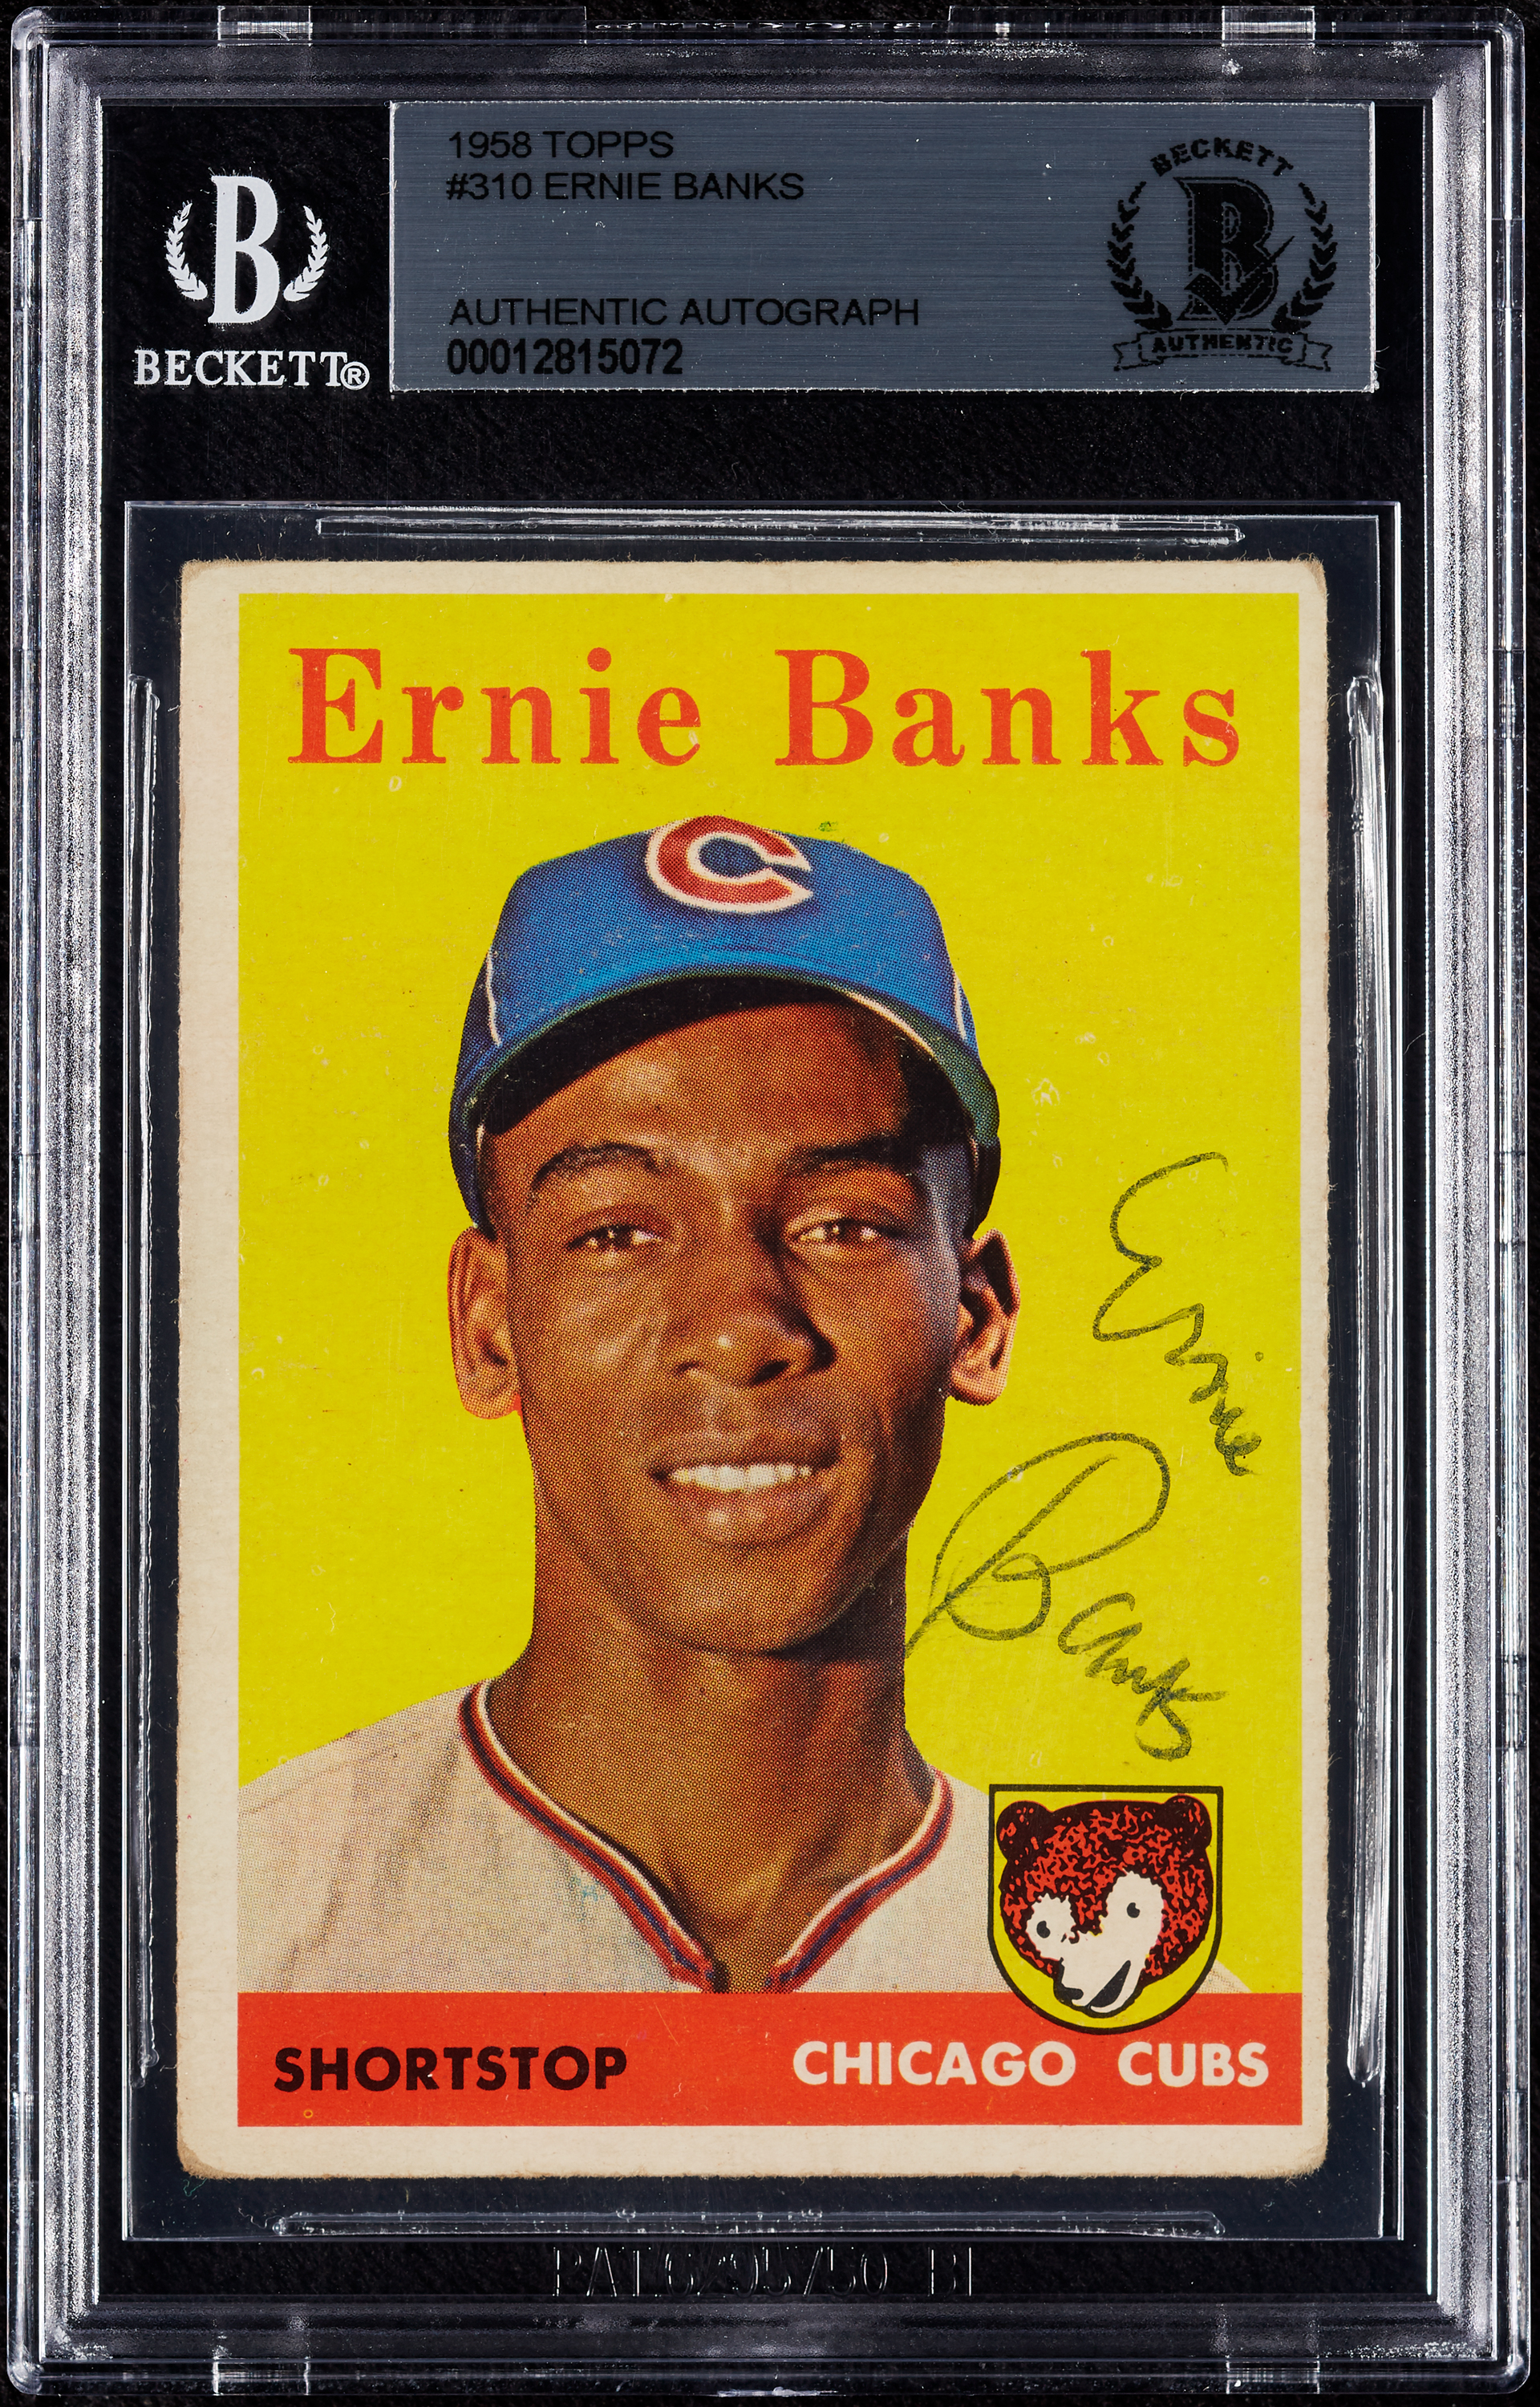 An Ernie Banks Signature Series Set of Signed Autograph Baseball Cards